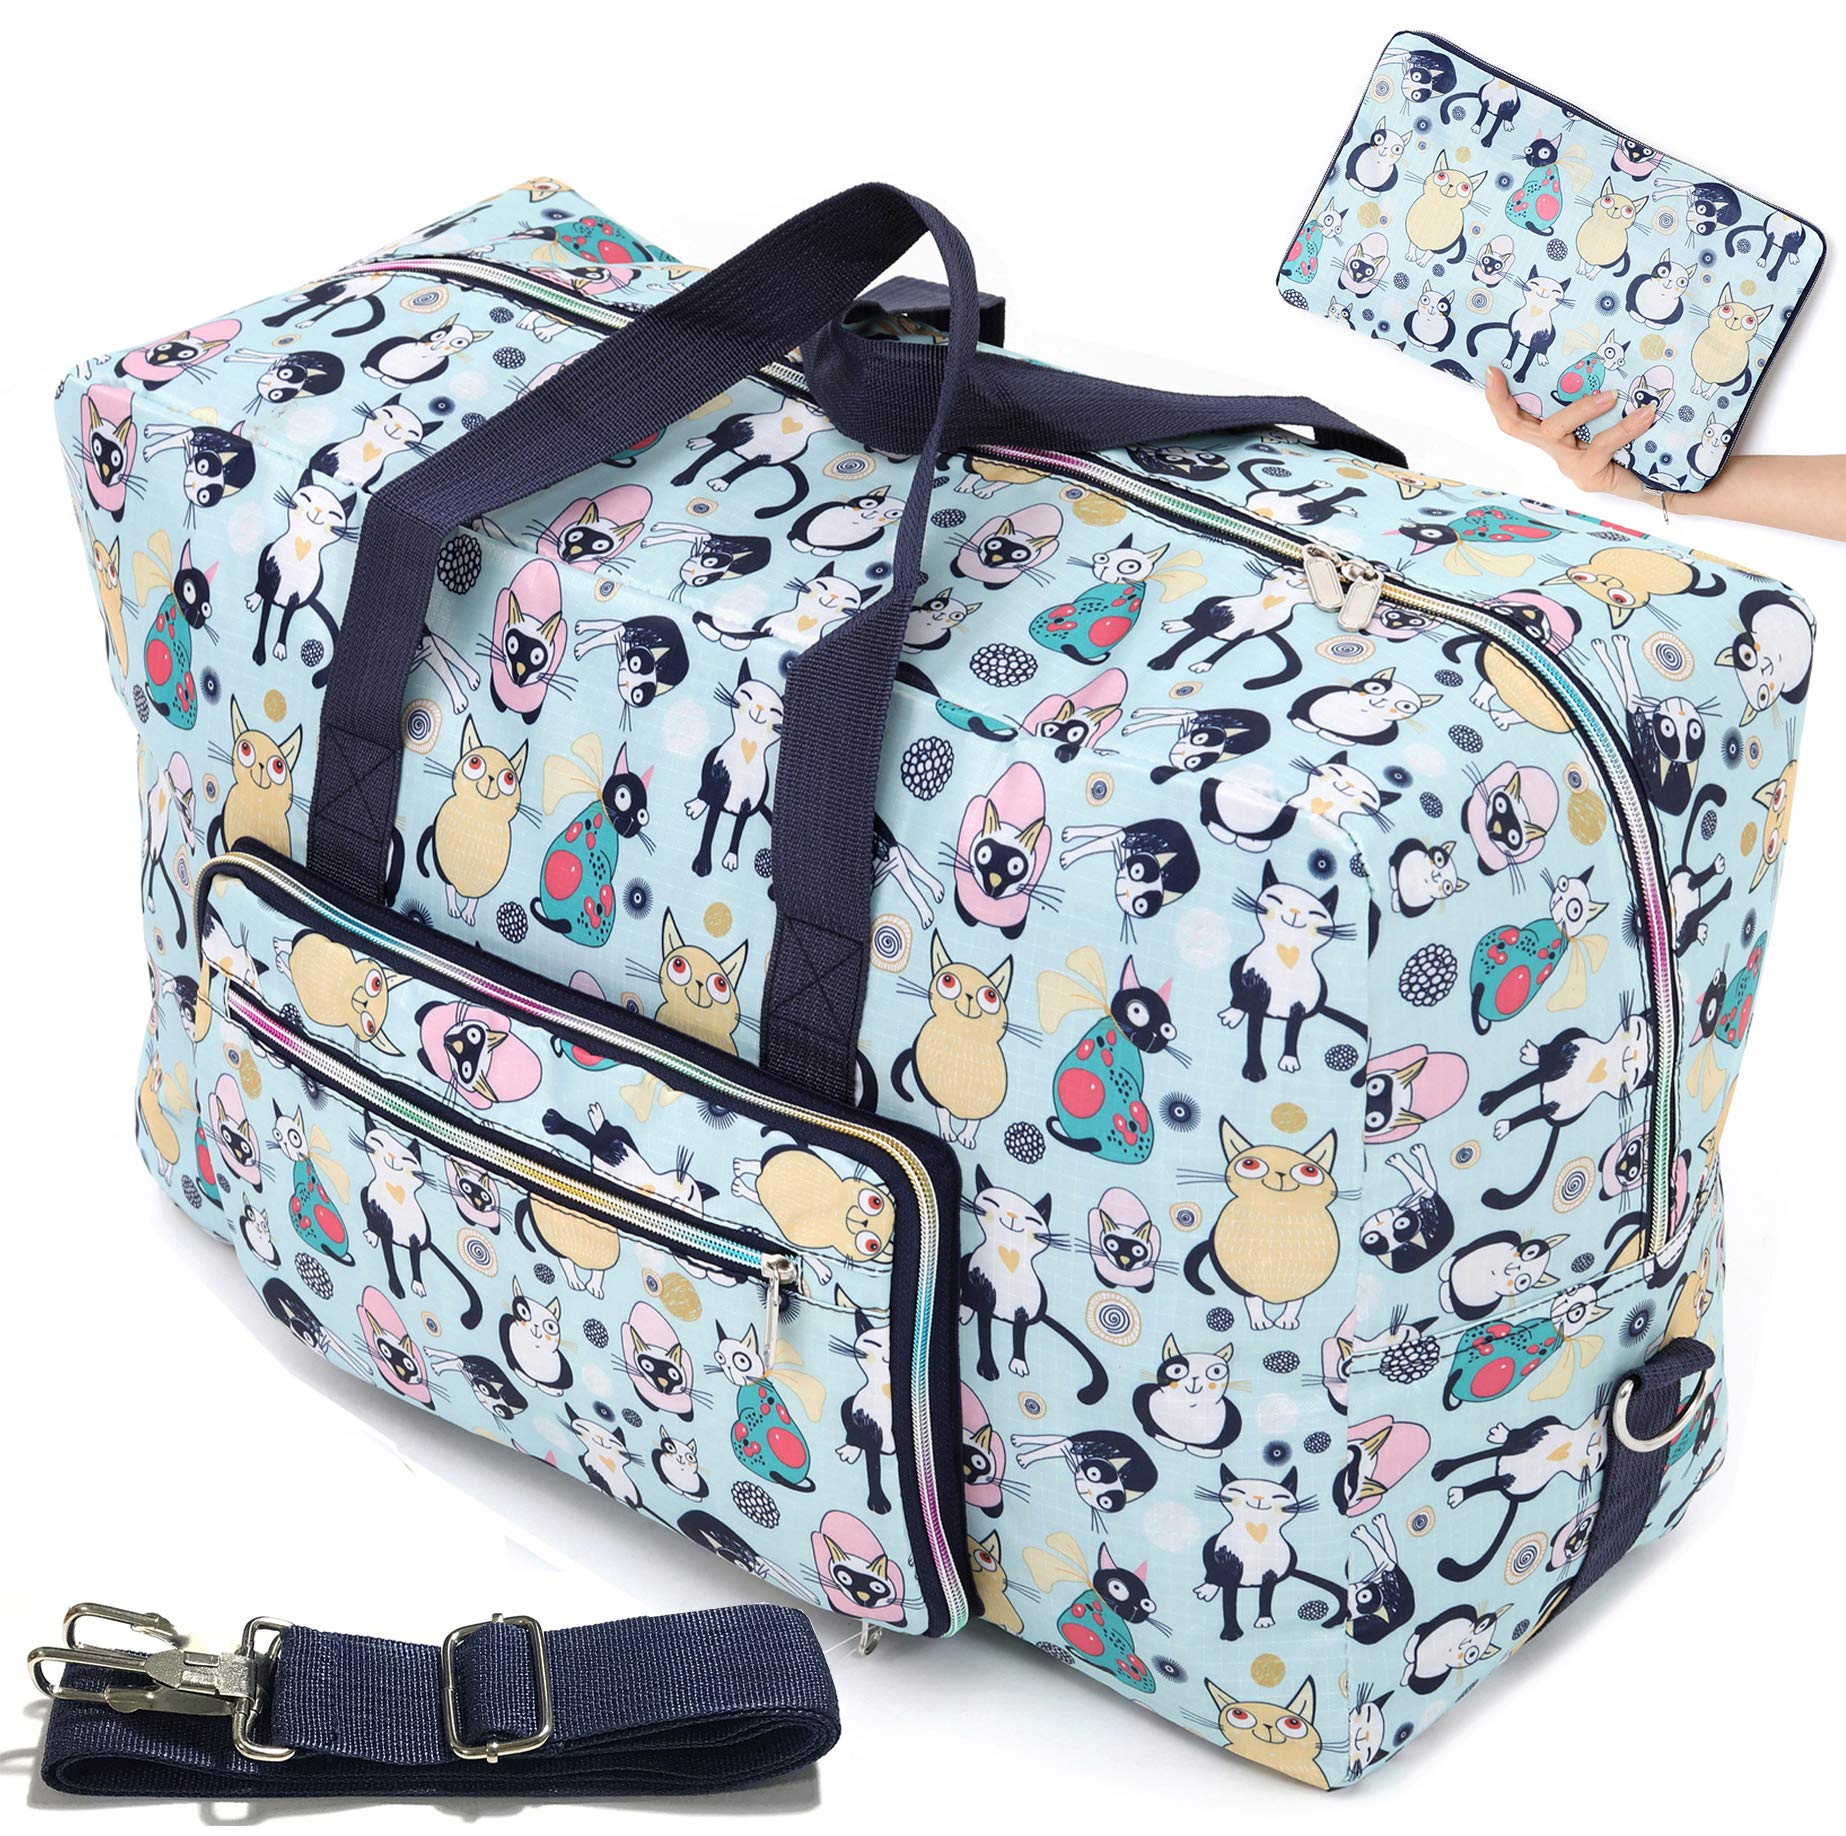 WFLB Large Foldable Travel Duffle Bag For Women girls cute Floral Weekender Overnight carry On checked Luggage Bag Hospital B